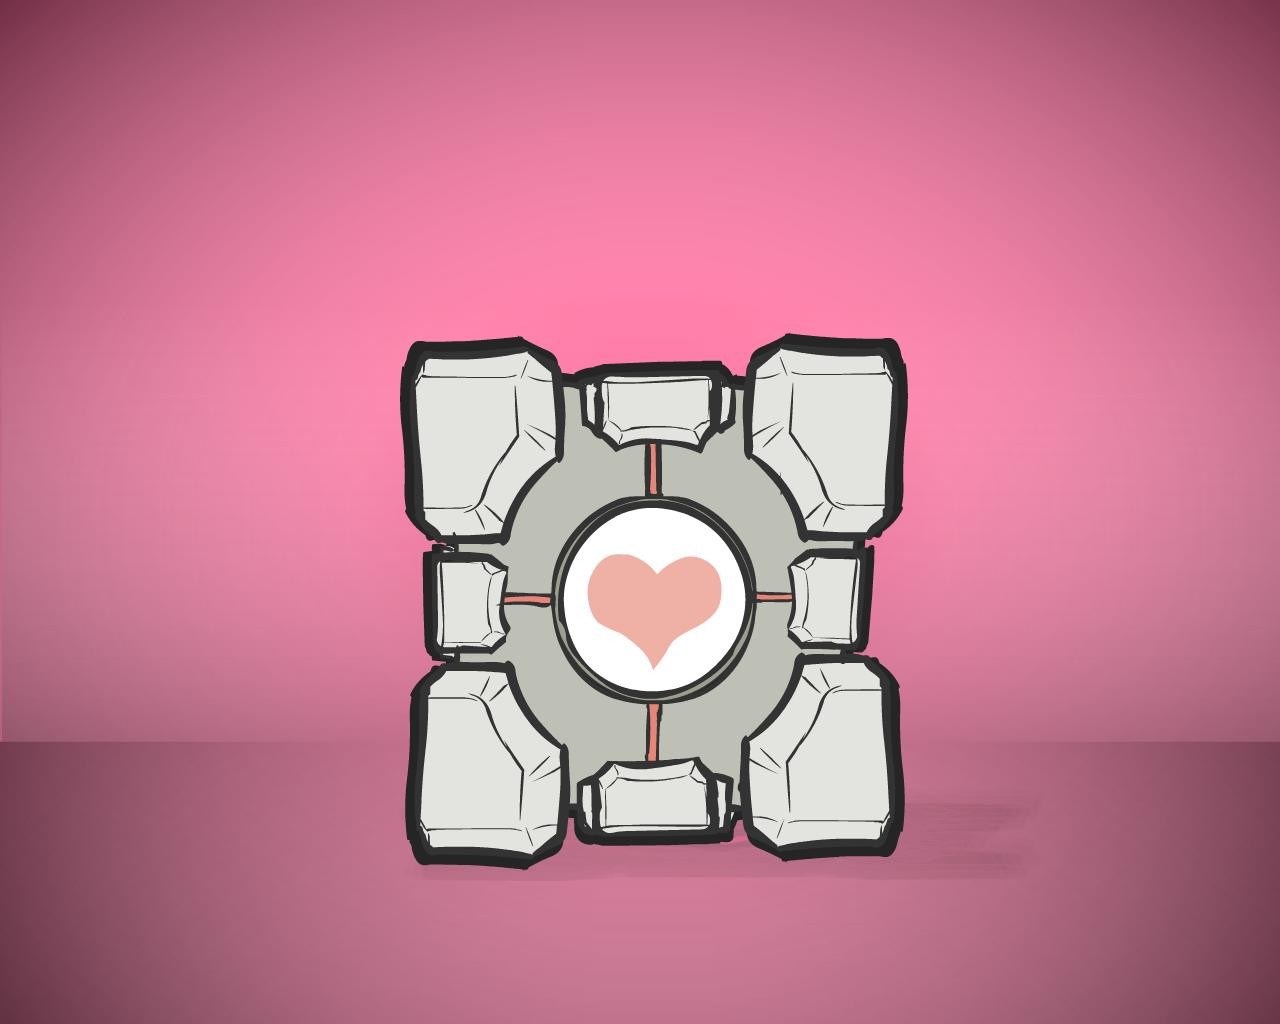 General 1280x1024 Companion Cube PC gaming video game art pink background Portal (game)